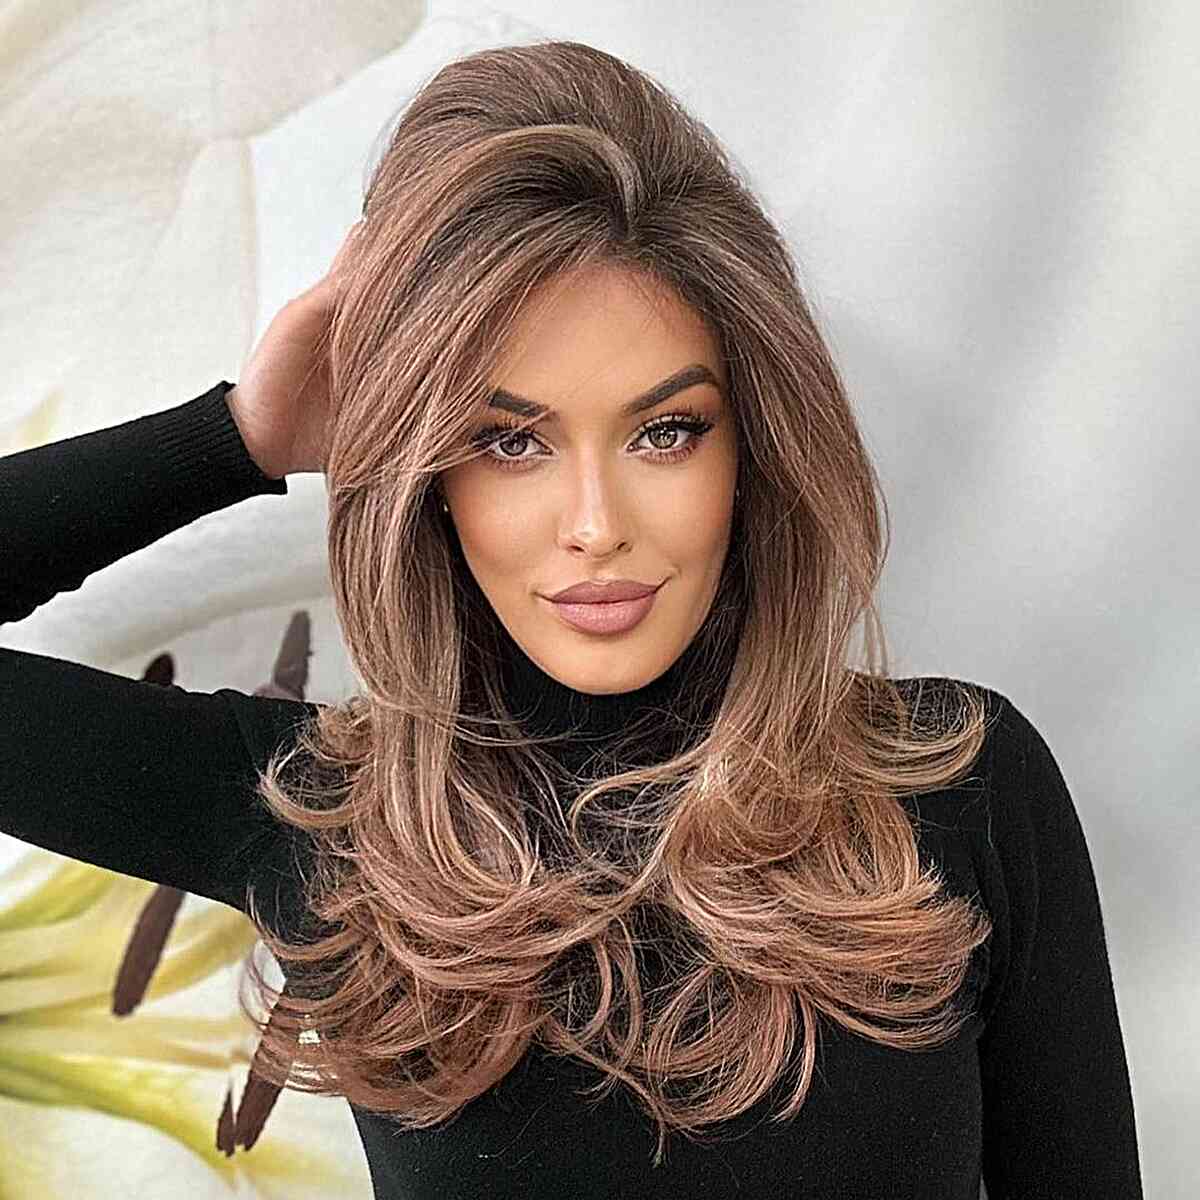 Rose Gold Brunette Hair for Long Faces and for women with medium-length hair